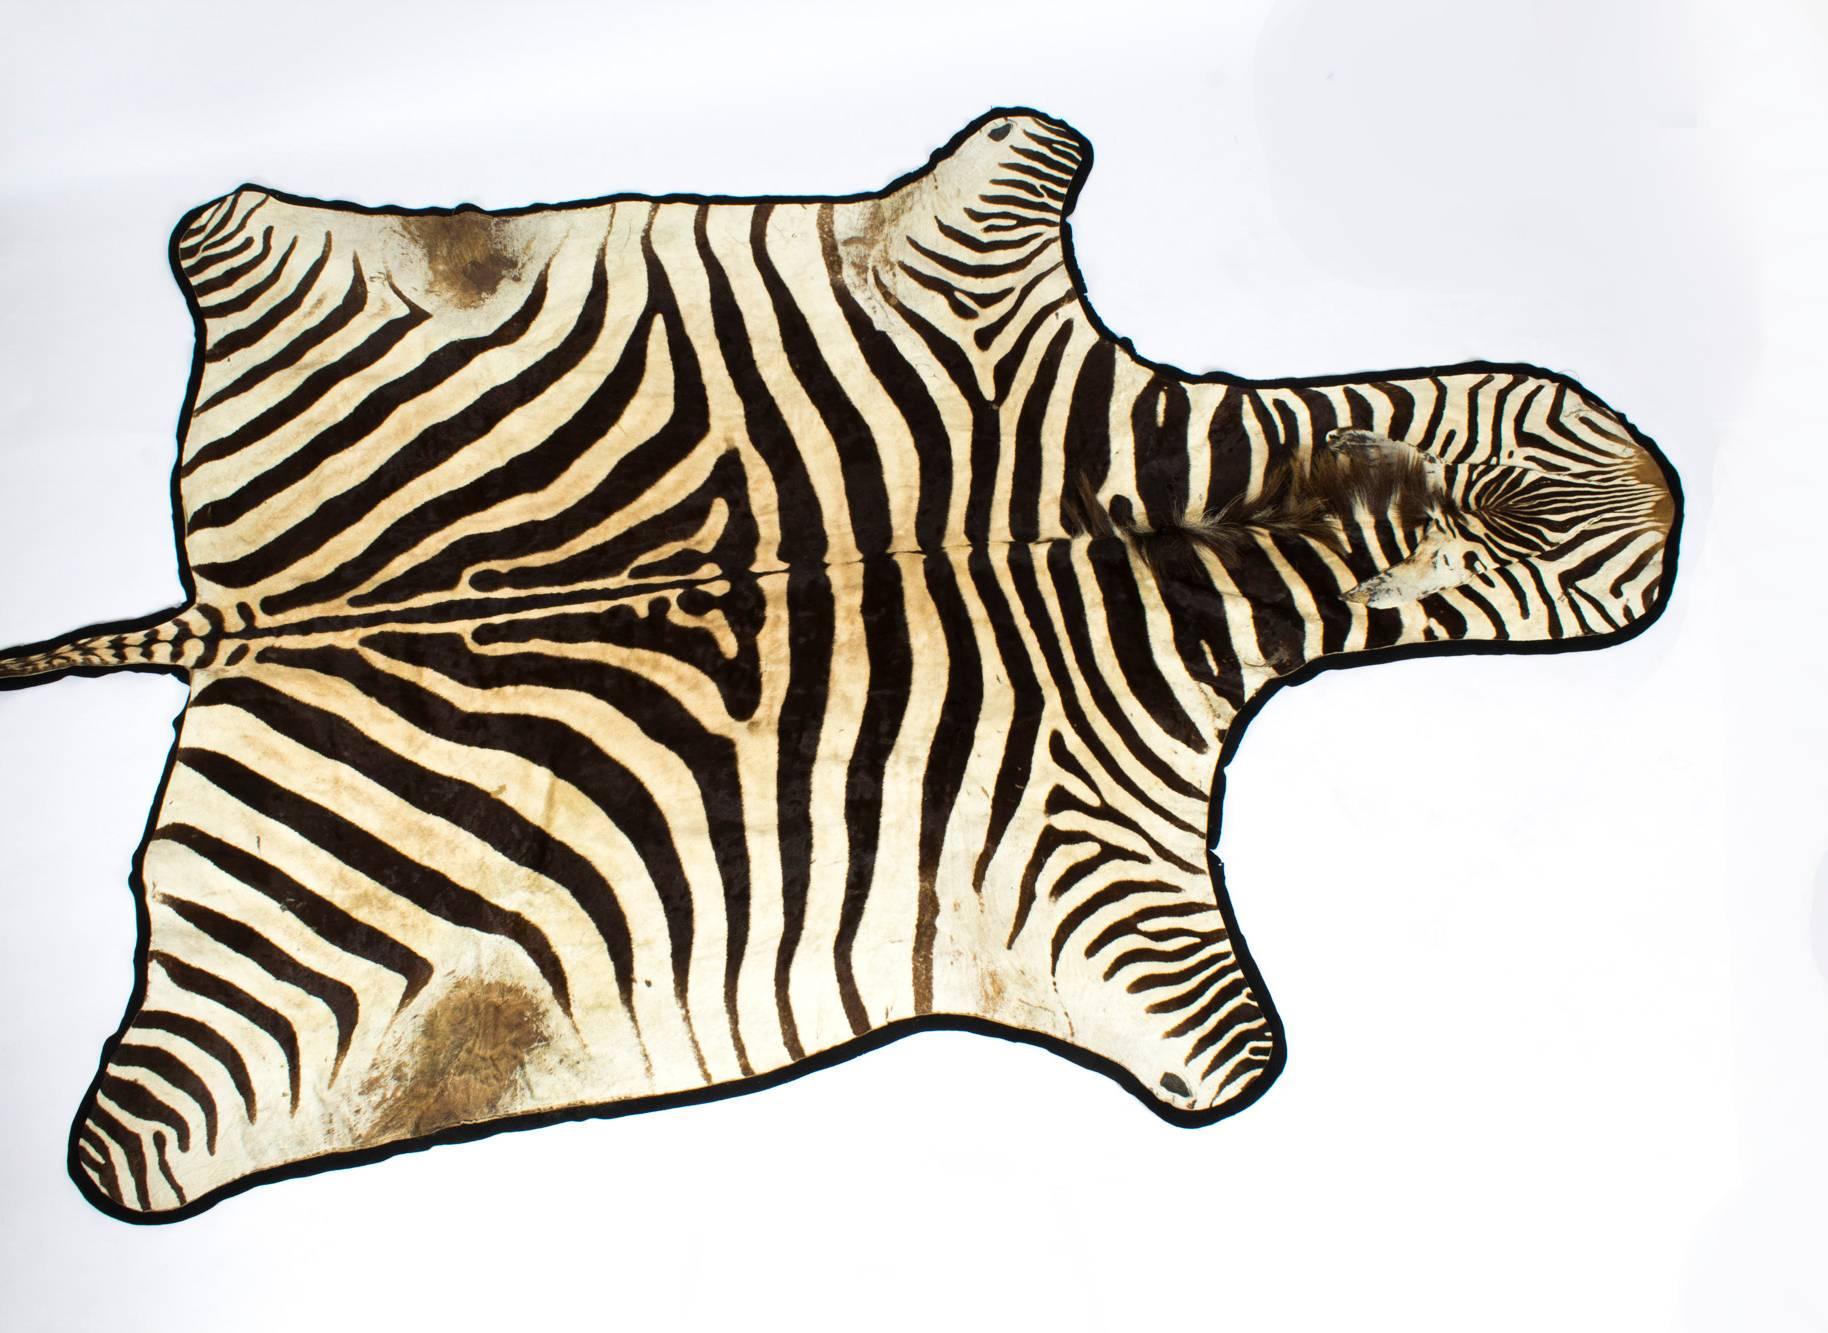 A lovely large taxidermy Burchell's Zebra skin rug, circa 1970.
The zebra (Equus quagga burchelli), has a flat head, preserved on a black baize backing.

Please note: as there are approximately 240,000 Burchill's Zebra in the wild, this species